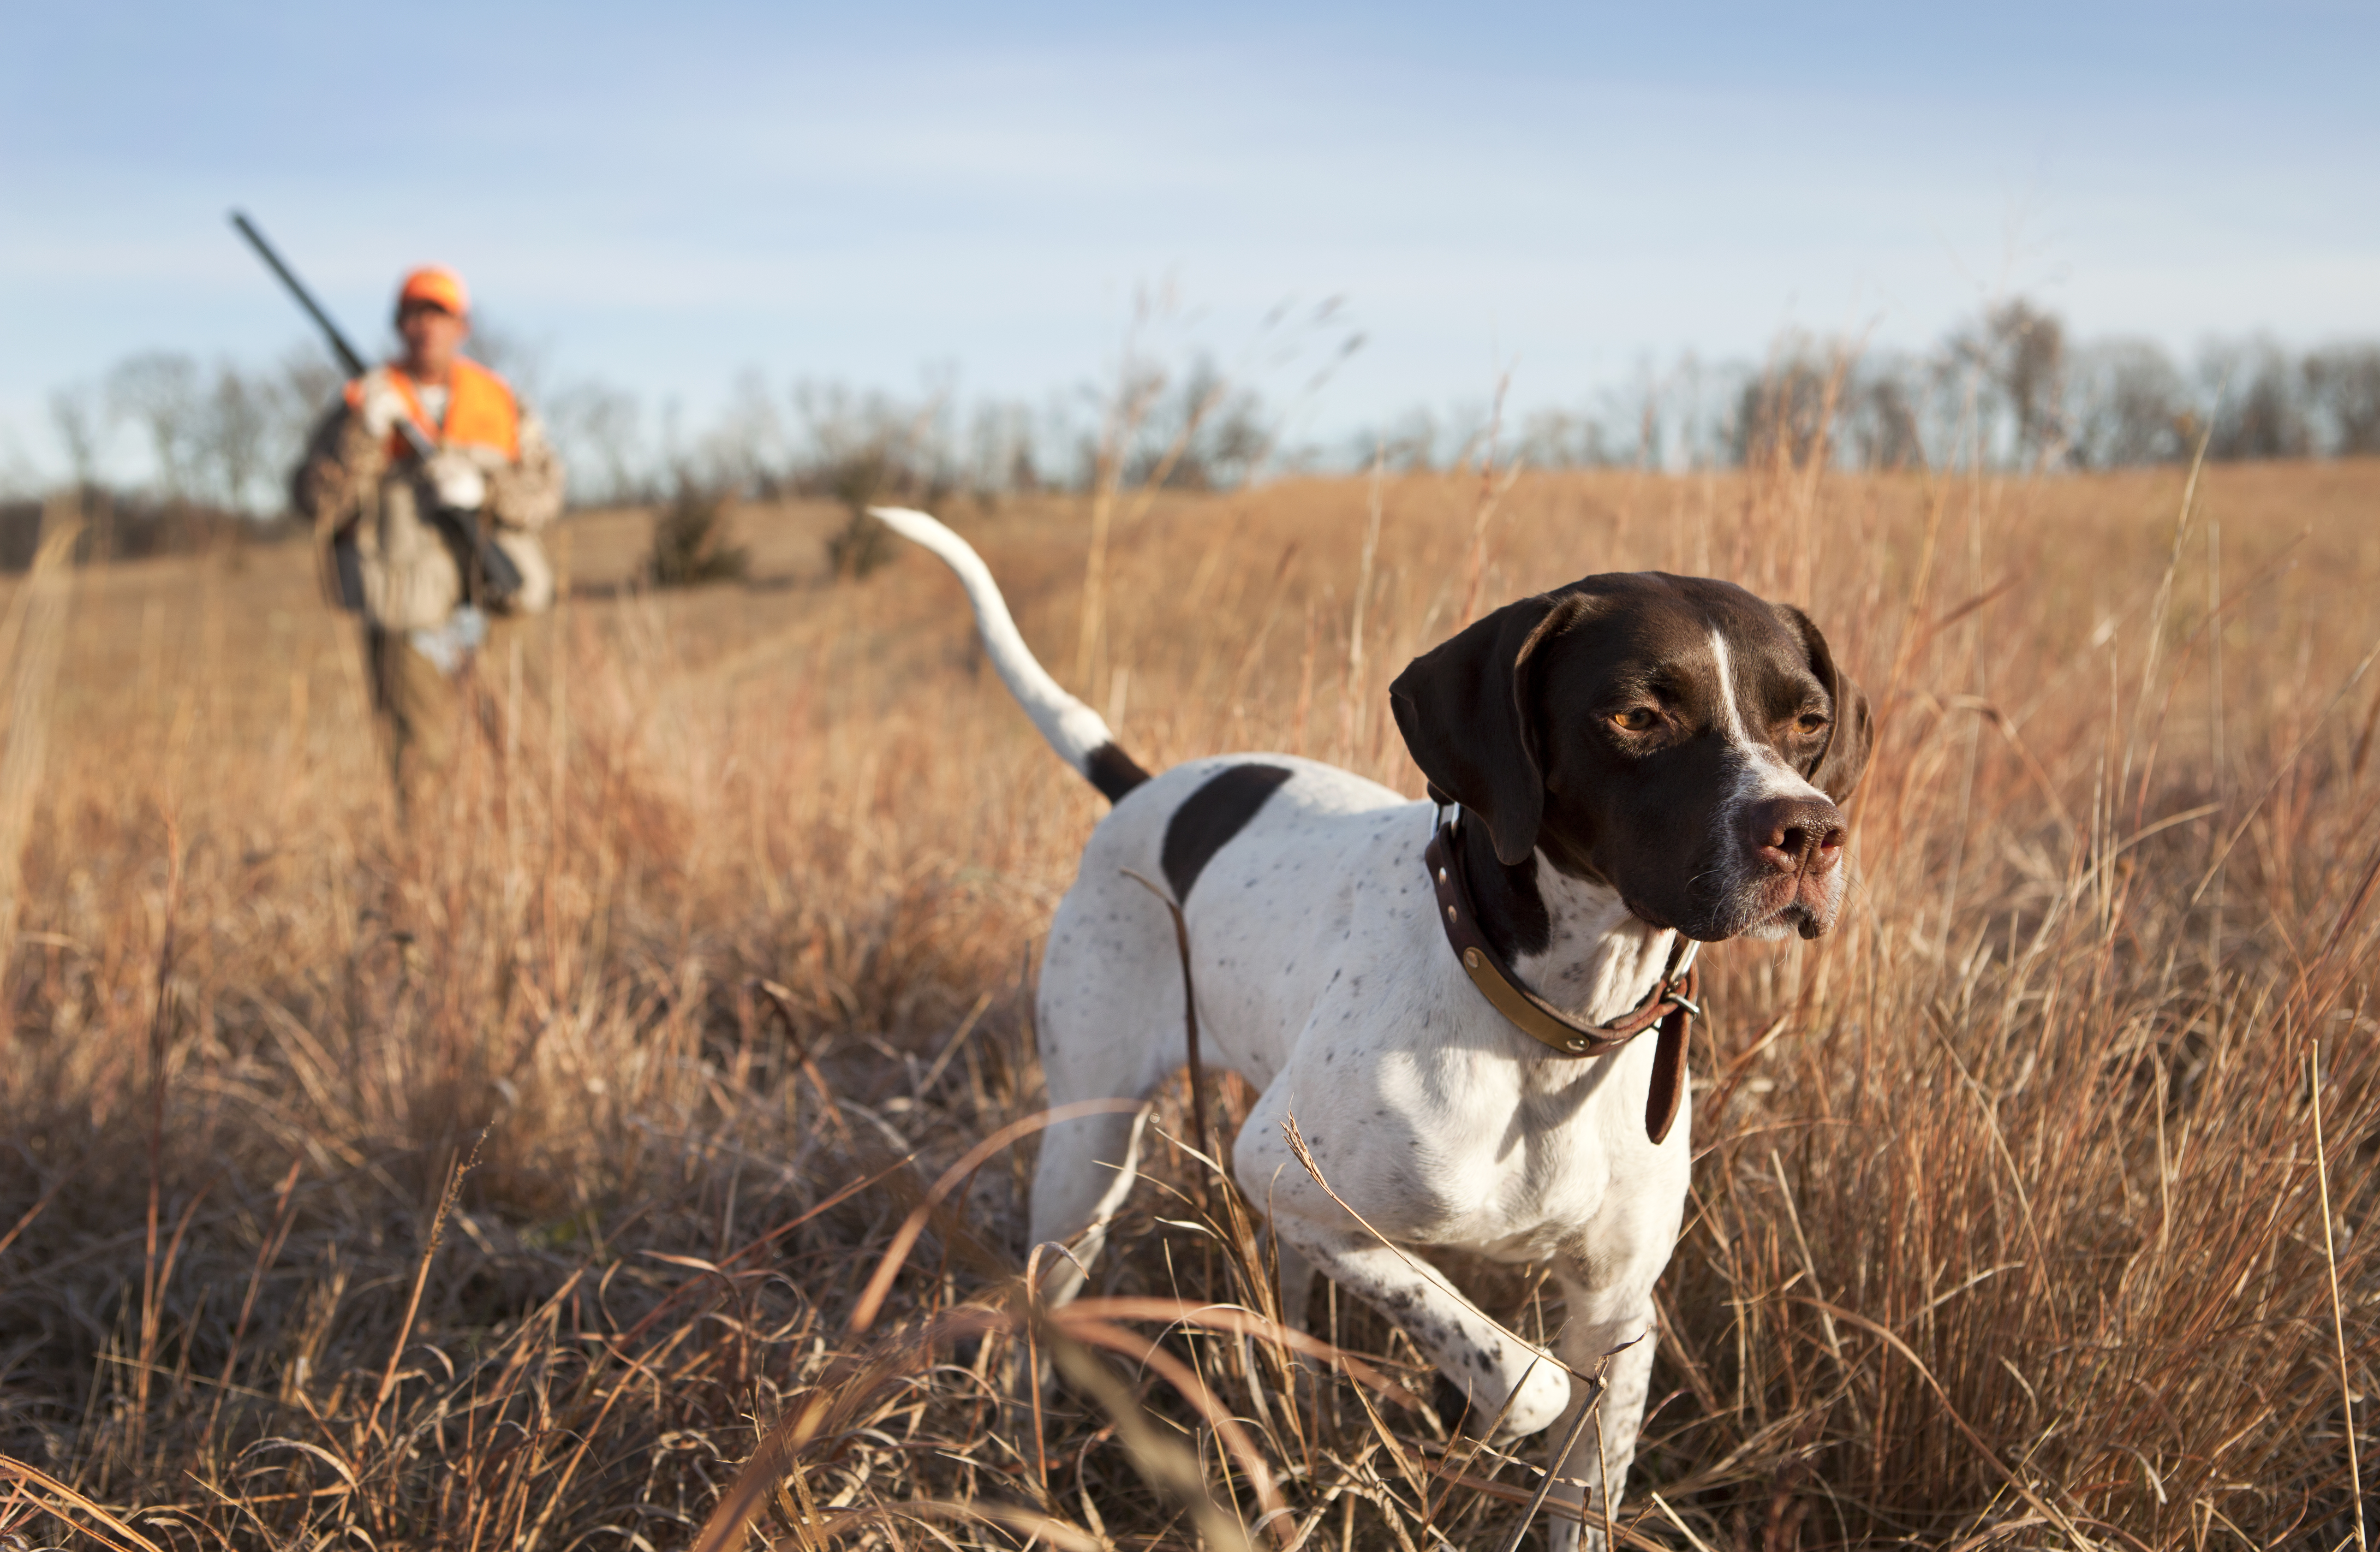 20 Hunting Dog Breeds That Make the Best Field Companions